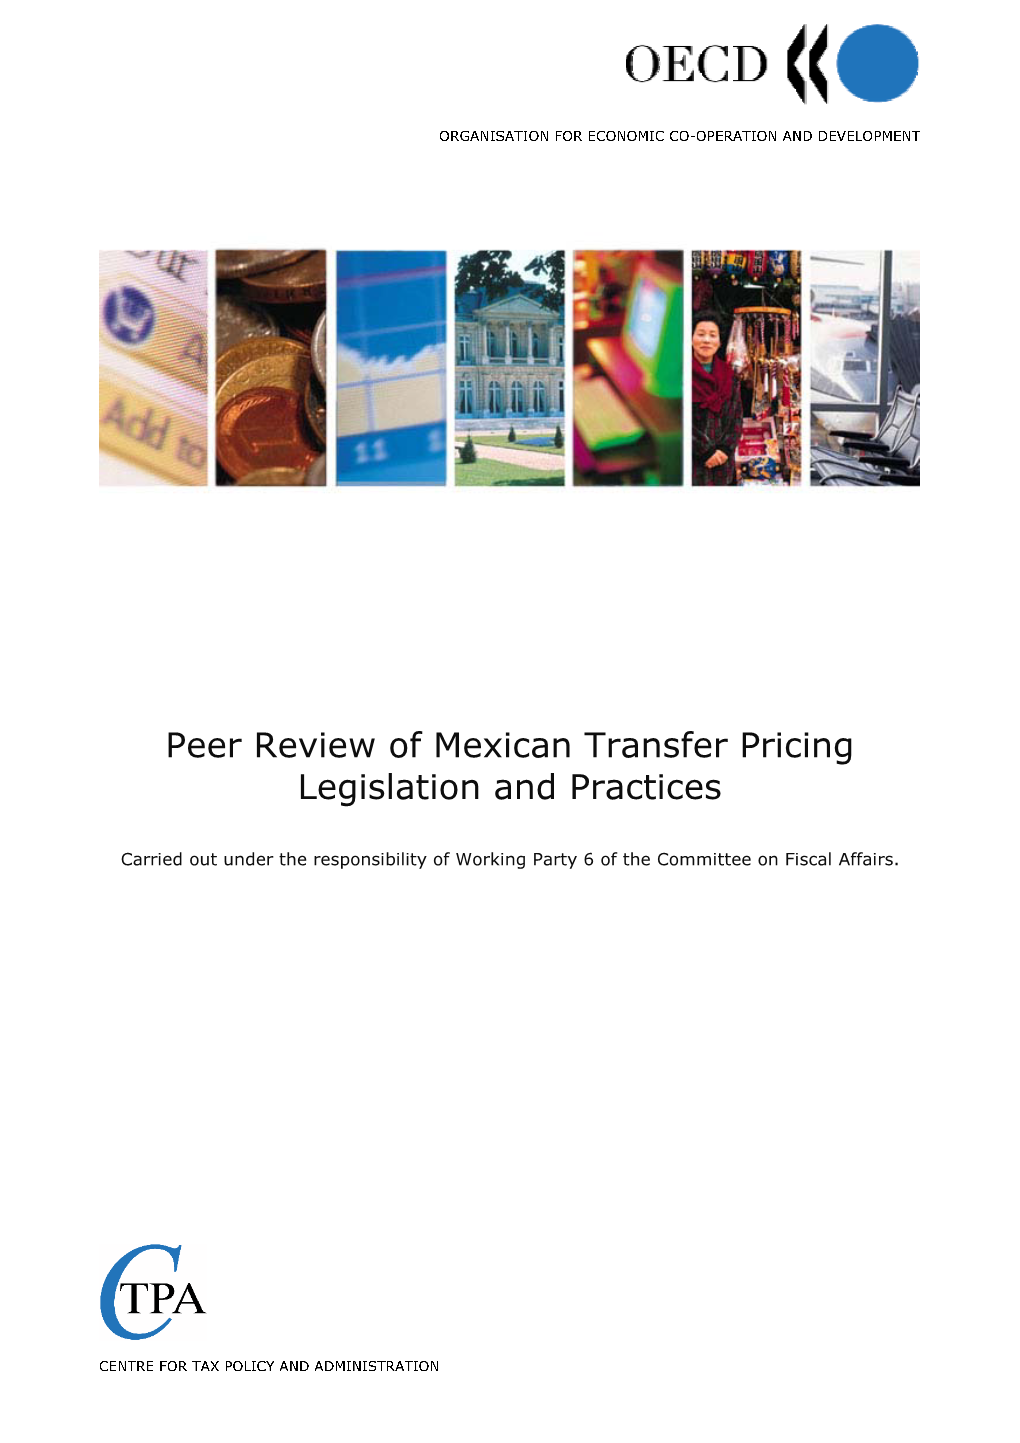 Peer Review of Mexican Transfer Pricing Legislation and Practices